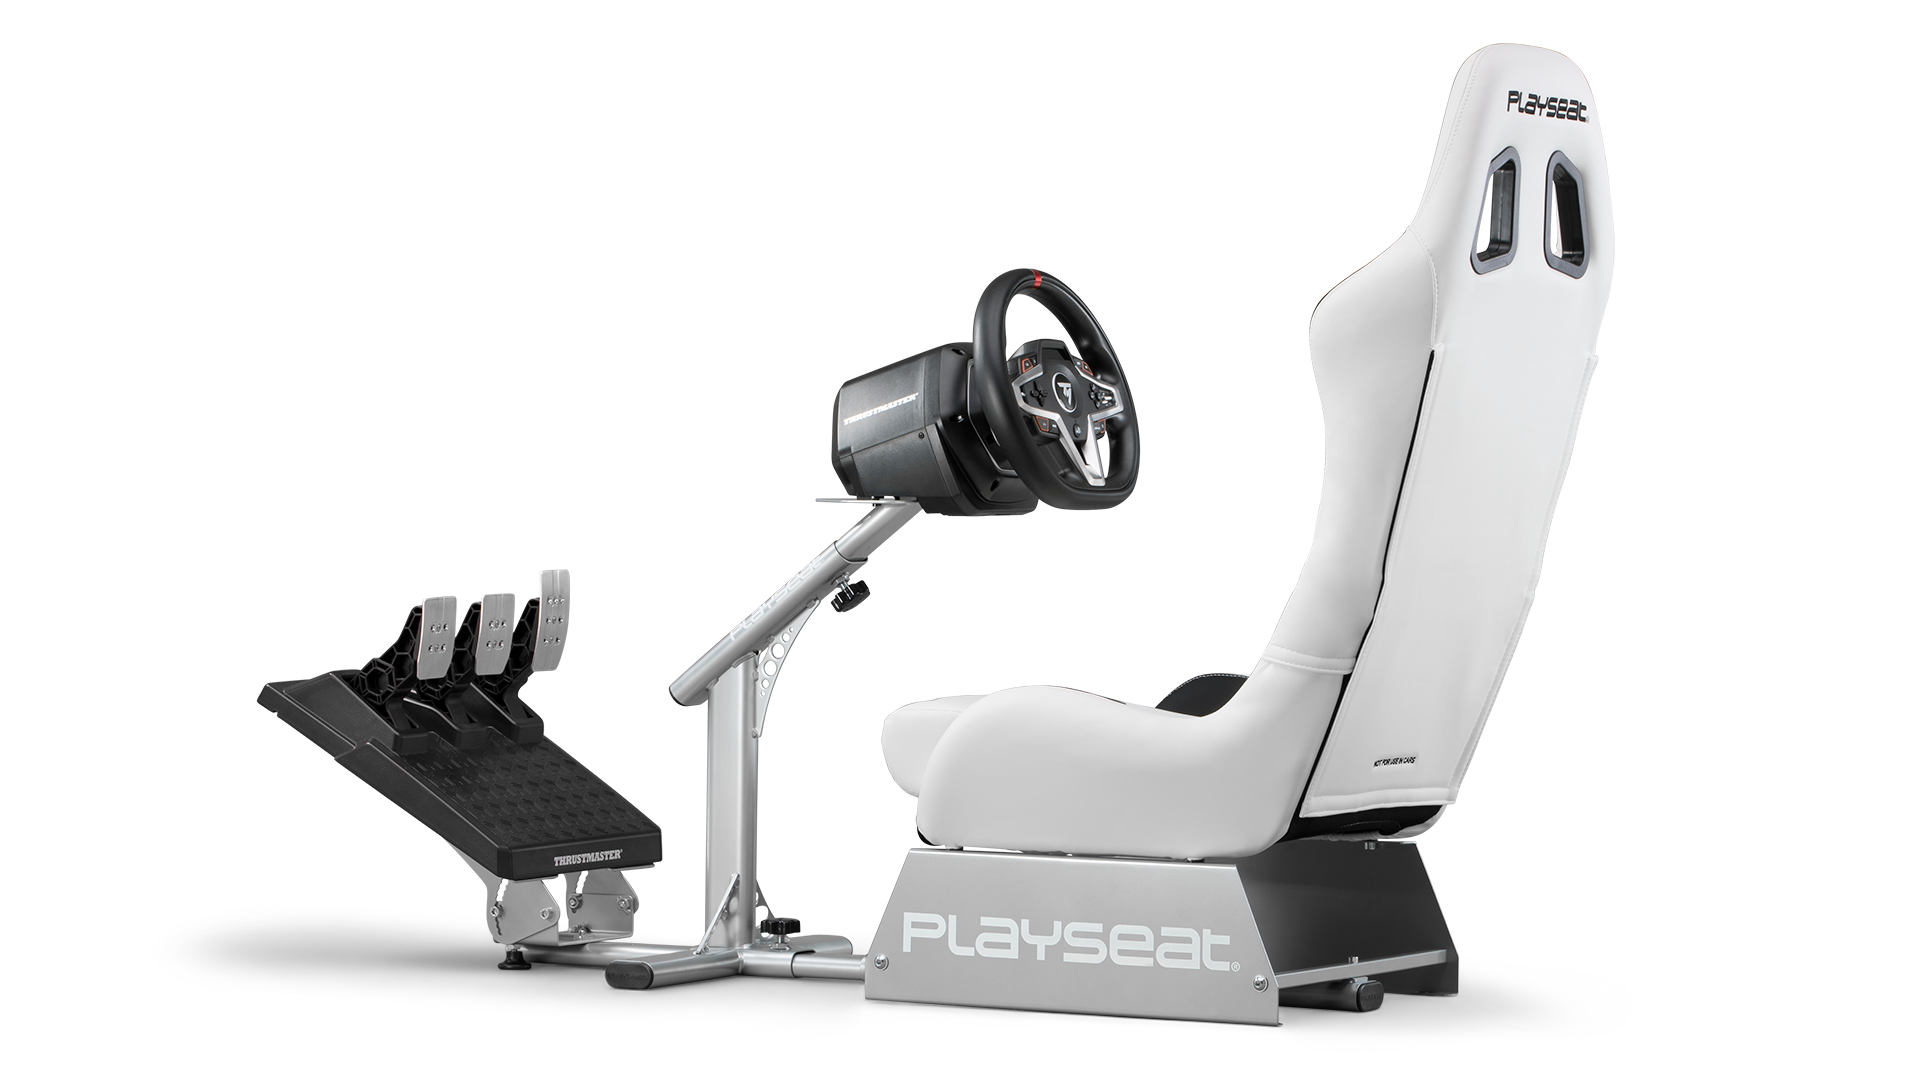 playseat-evolution-white-racing-simulator-back-angle-view-thrustmaster-1920x1080-2.png